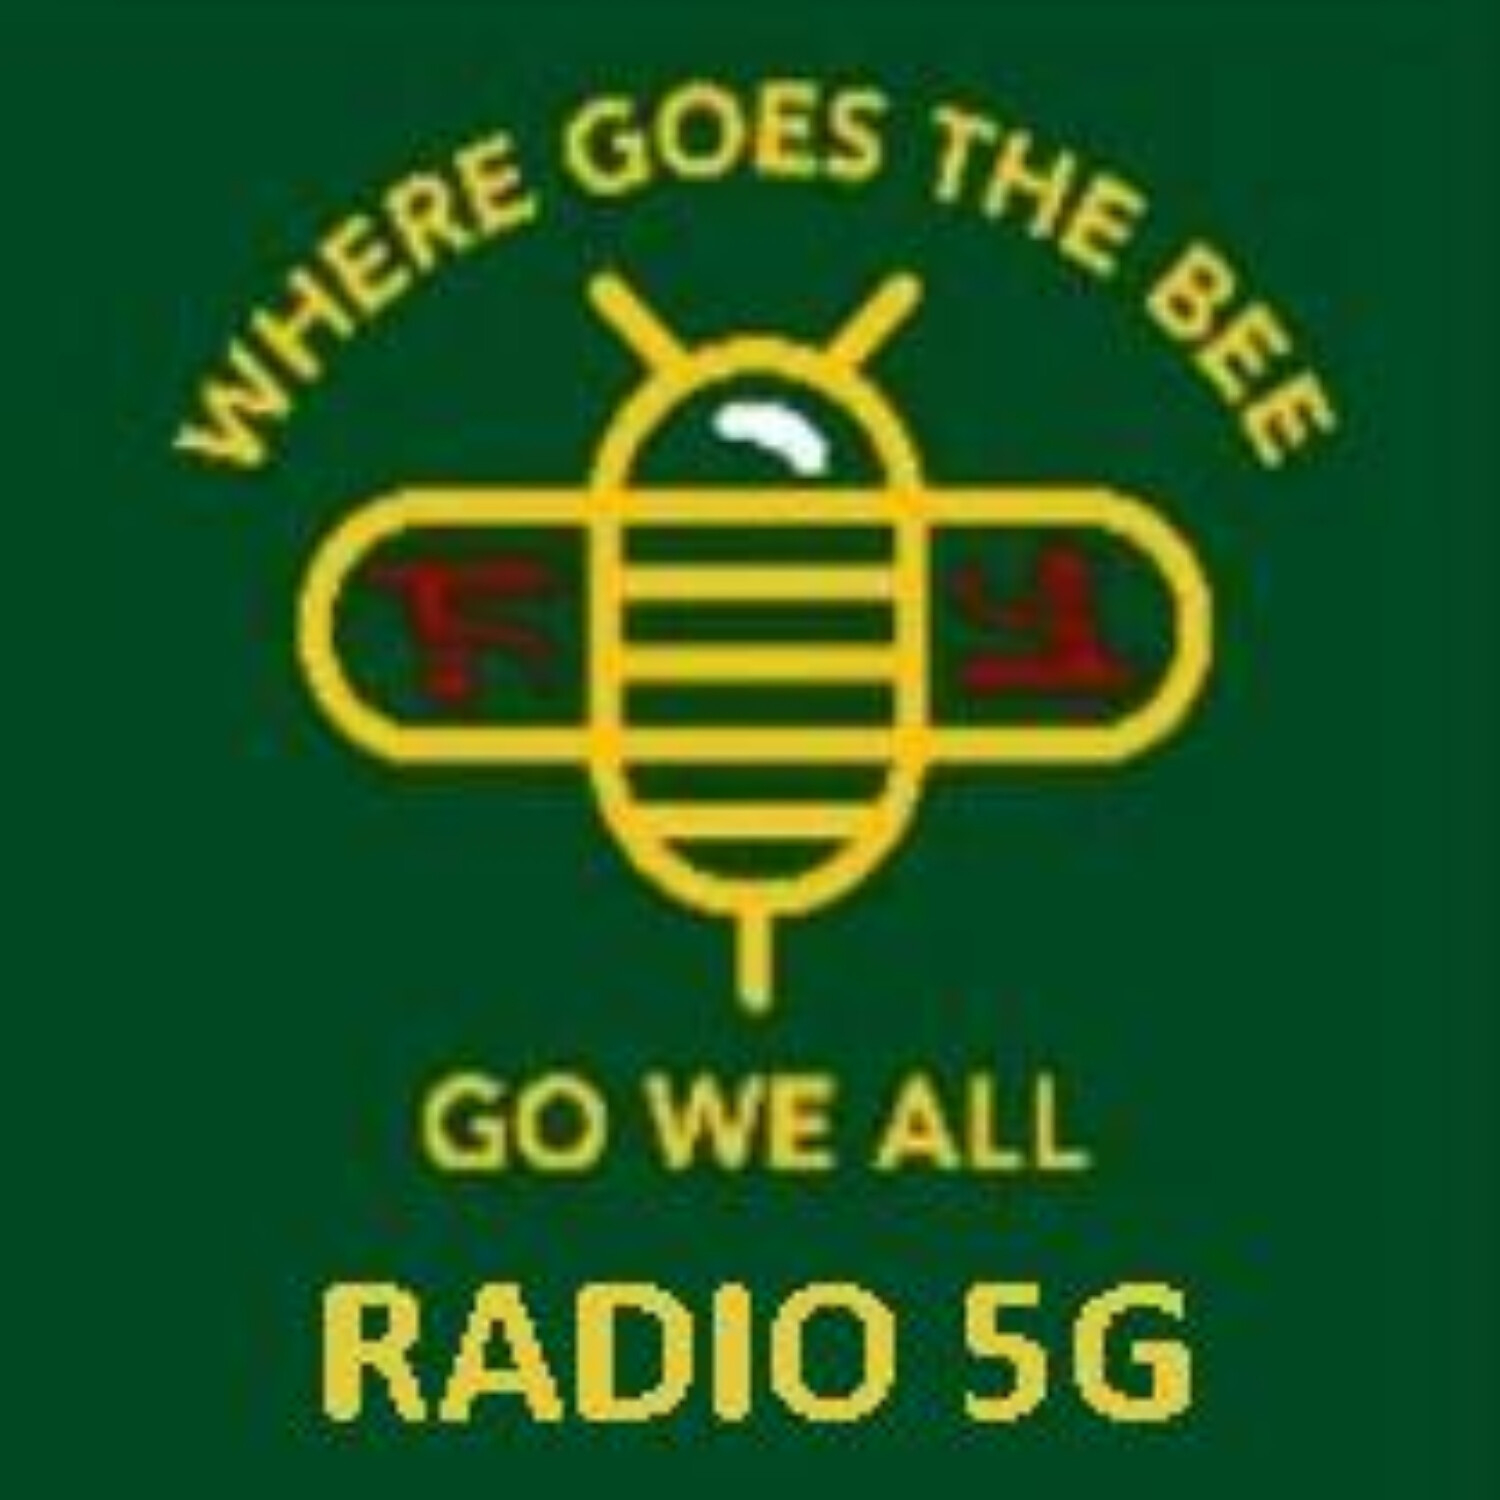 RADIO 5G 10/2/19 - Mark Steele on 5G and Climate Hoax